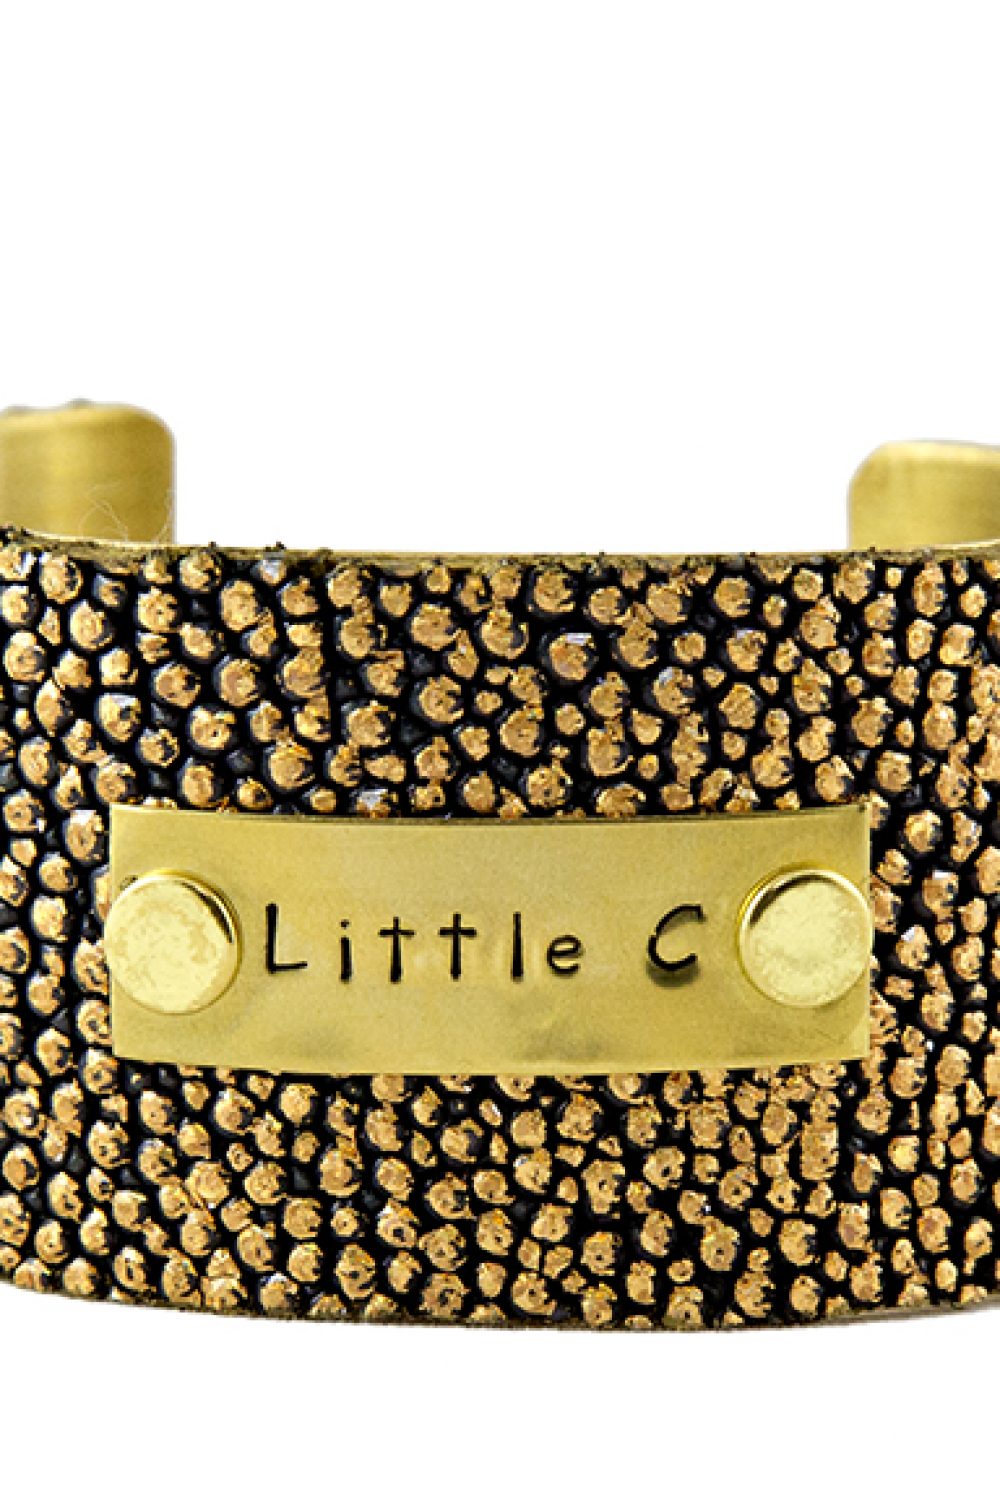 Whiny Wednesday: My “little C.” Cuff